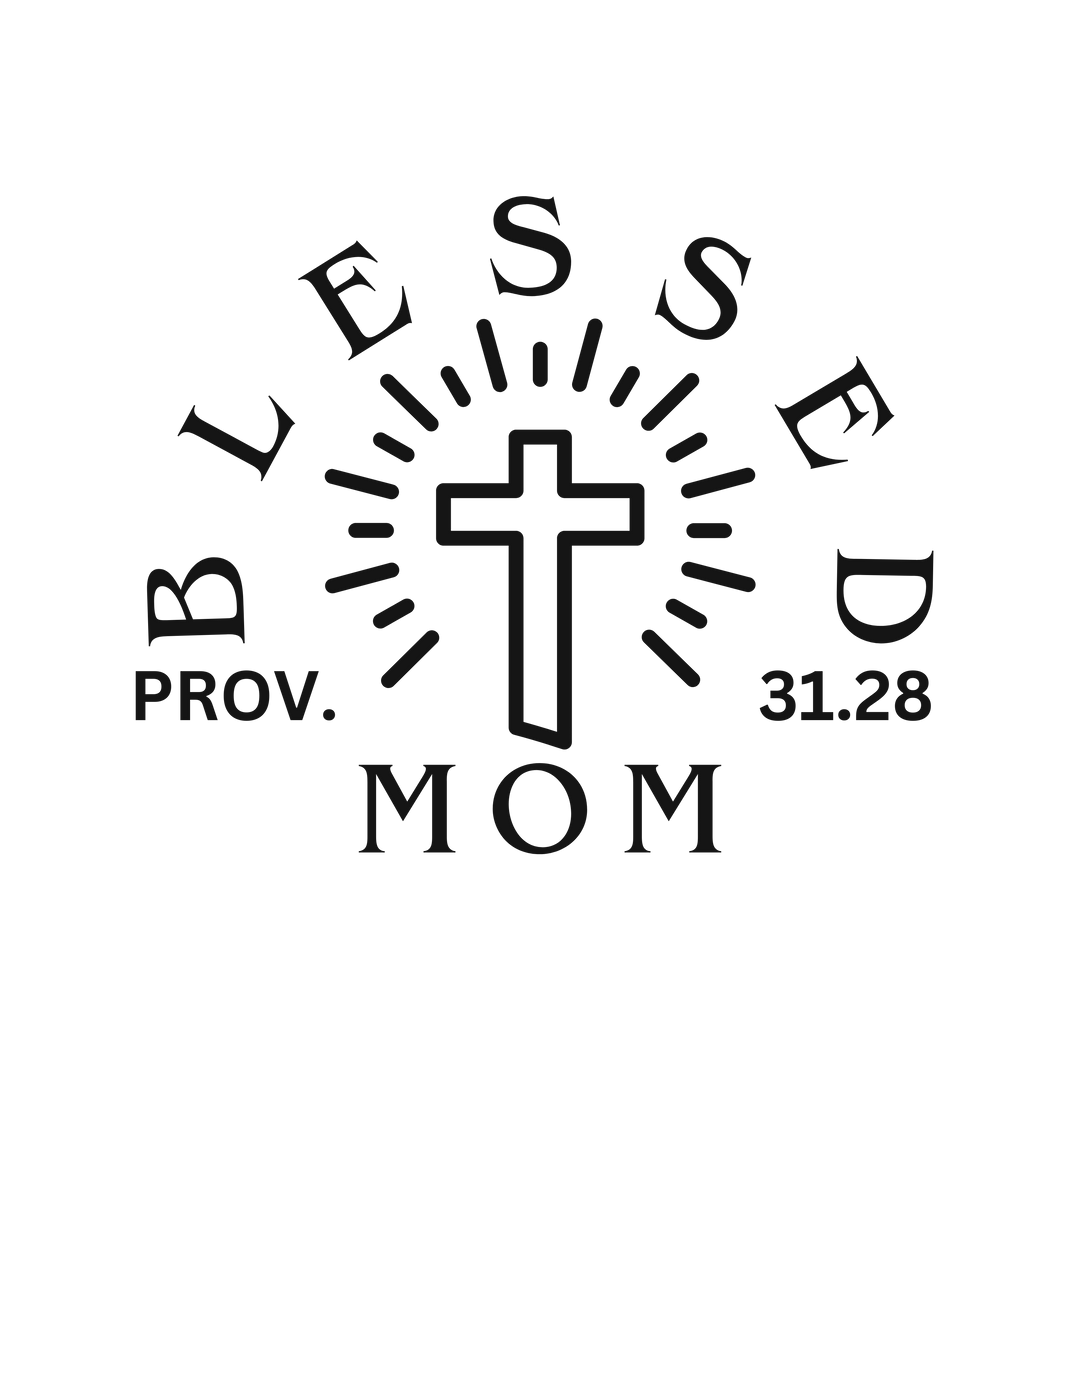 A black tee with a cross design, ideal for daily wear. Blessed Mom Tee in 100% ring-spun cotton, relaxed fit, and durable double-needle stitching. From 'Worlds Worst Tees'.